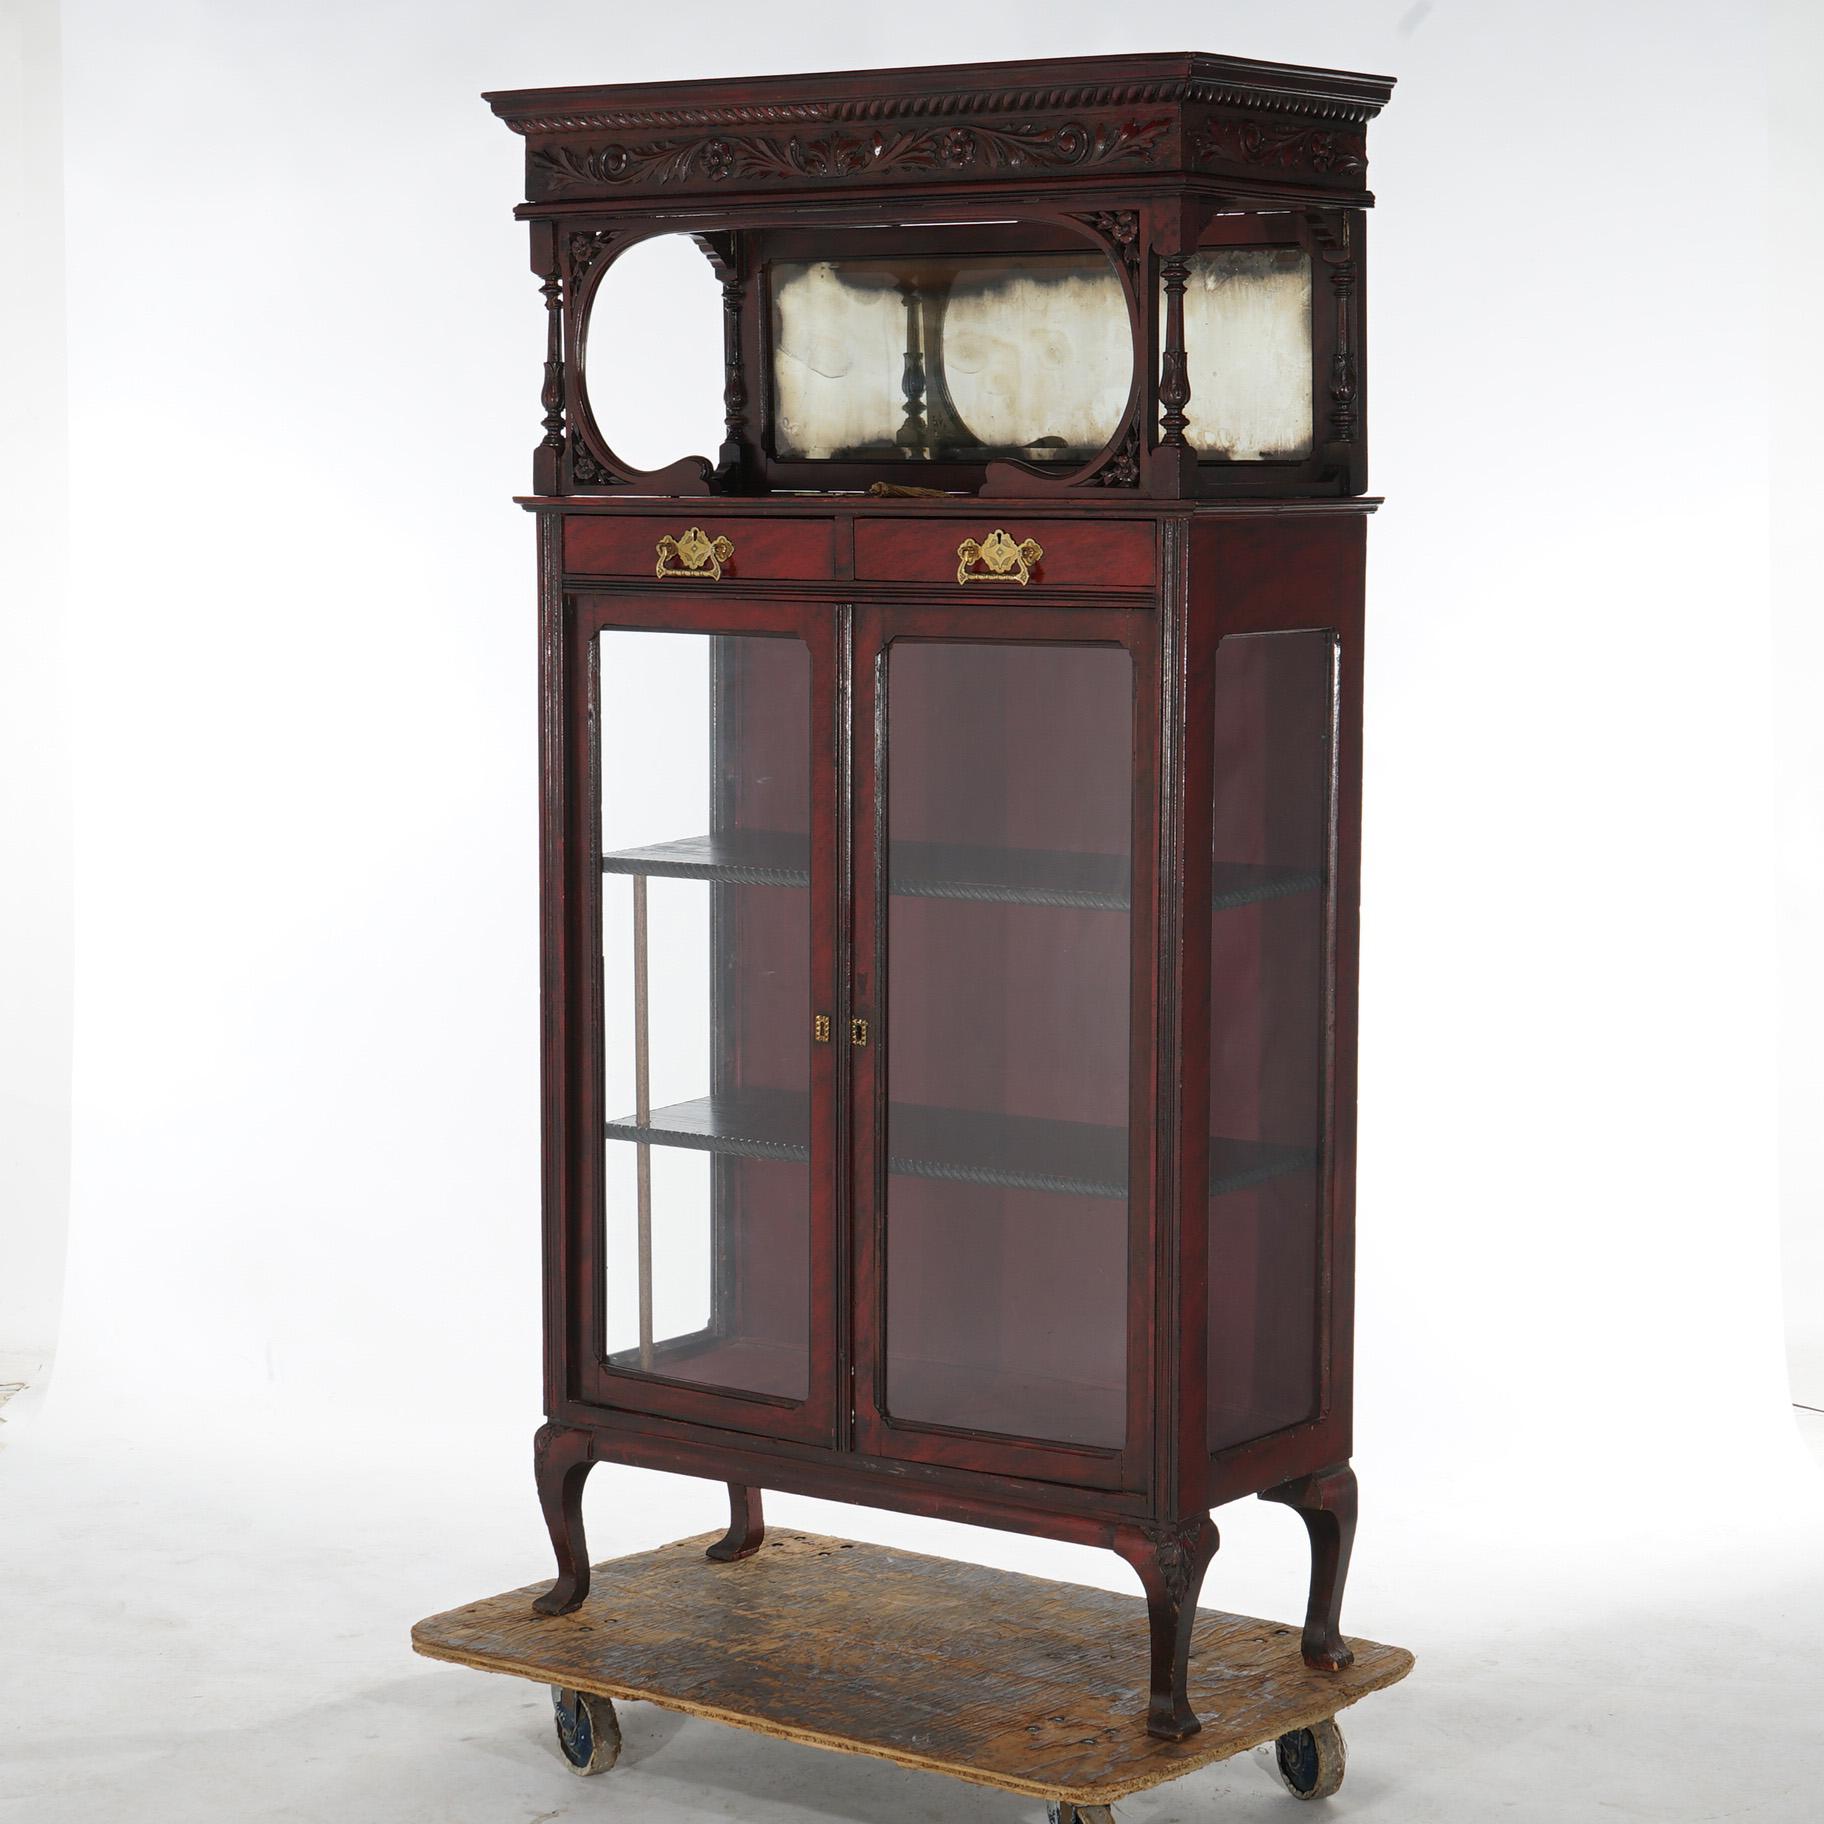 ***Ask About Reduced In-House Delivery Rates - Reliable Professional Service & Fully Insured***

Antique Floral Carved Mahogany Two-Door & Two-Drawer Mirrored China Cabinet with Upper Mirrored Gallery and Lower Glass Cabinet, C1910

Measures -